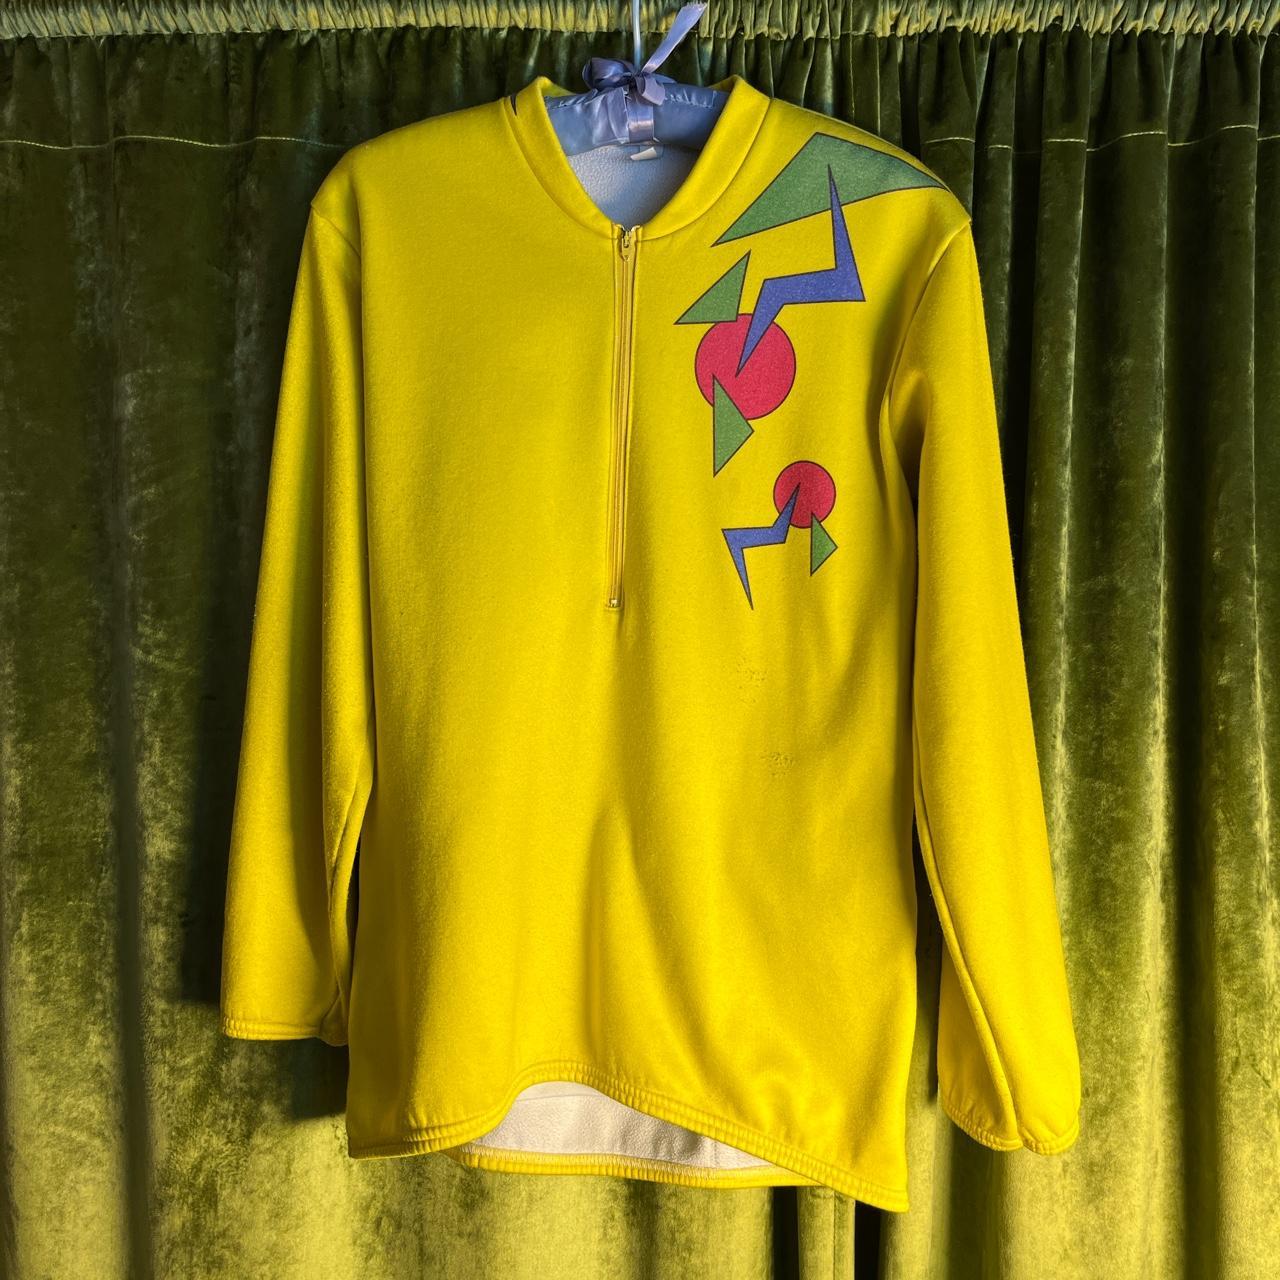 Men’s Vintage 1980’s Polyester Cycling Yellow Jersey